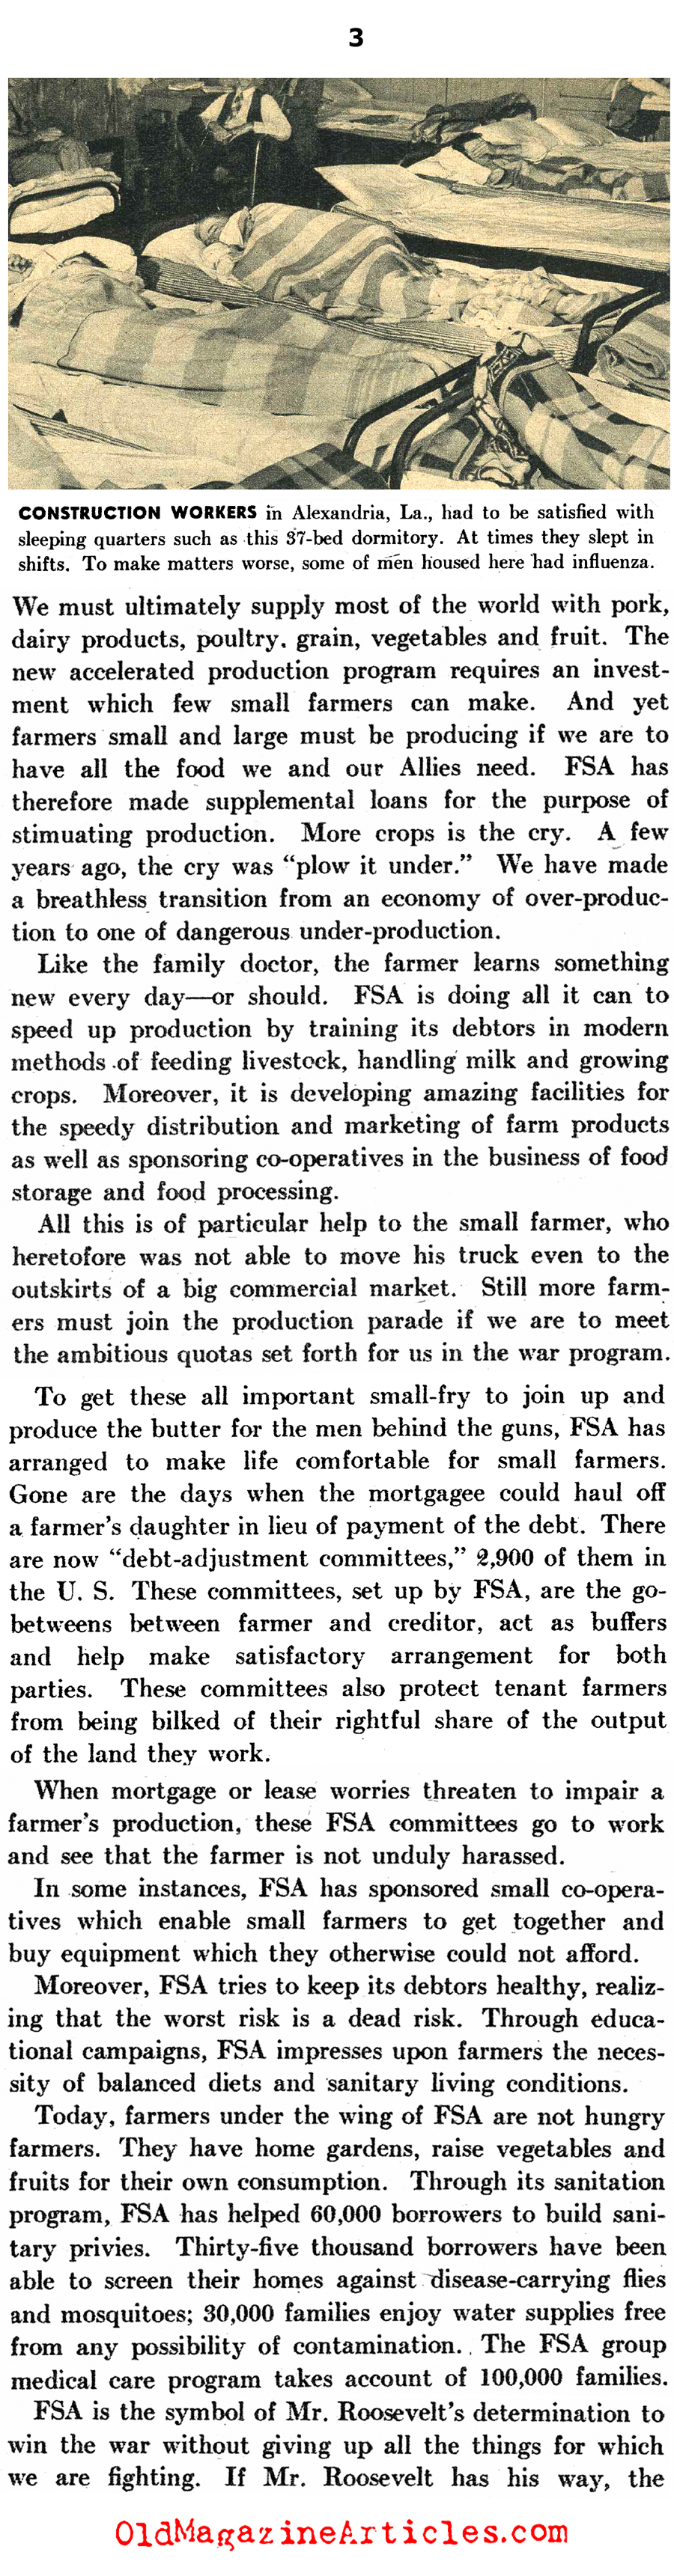 Aid From  The Farm Service Administration (Pic Magazine, 1942)